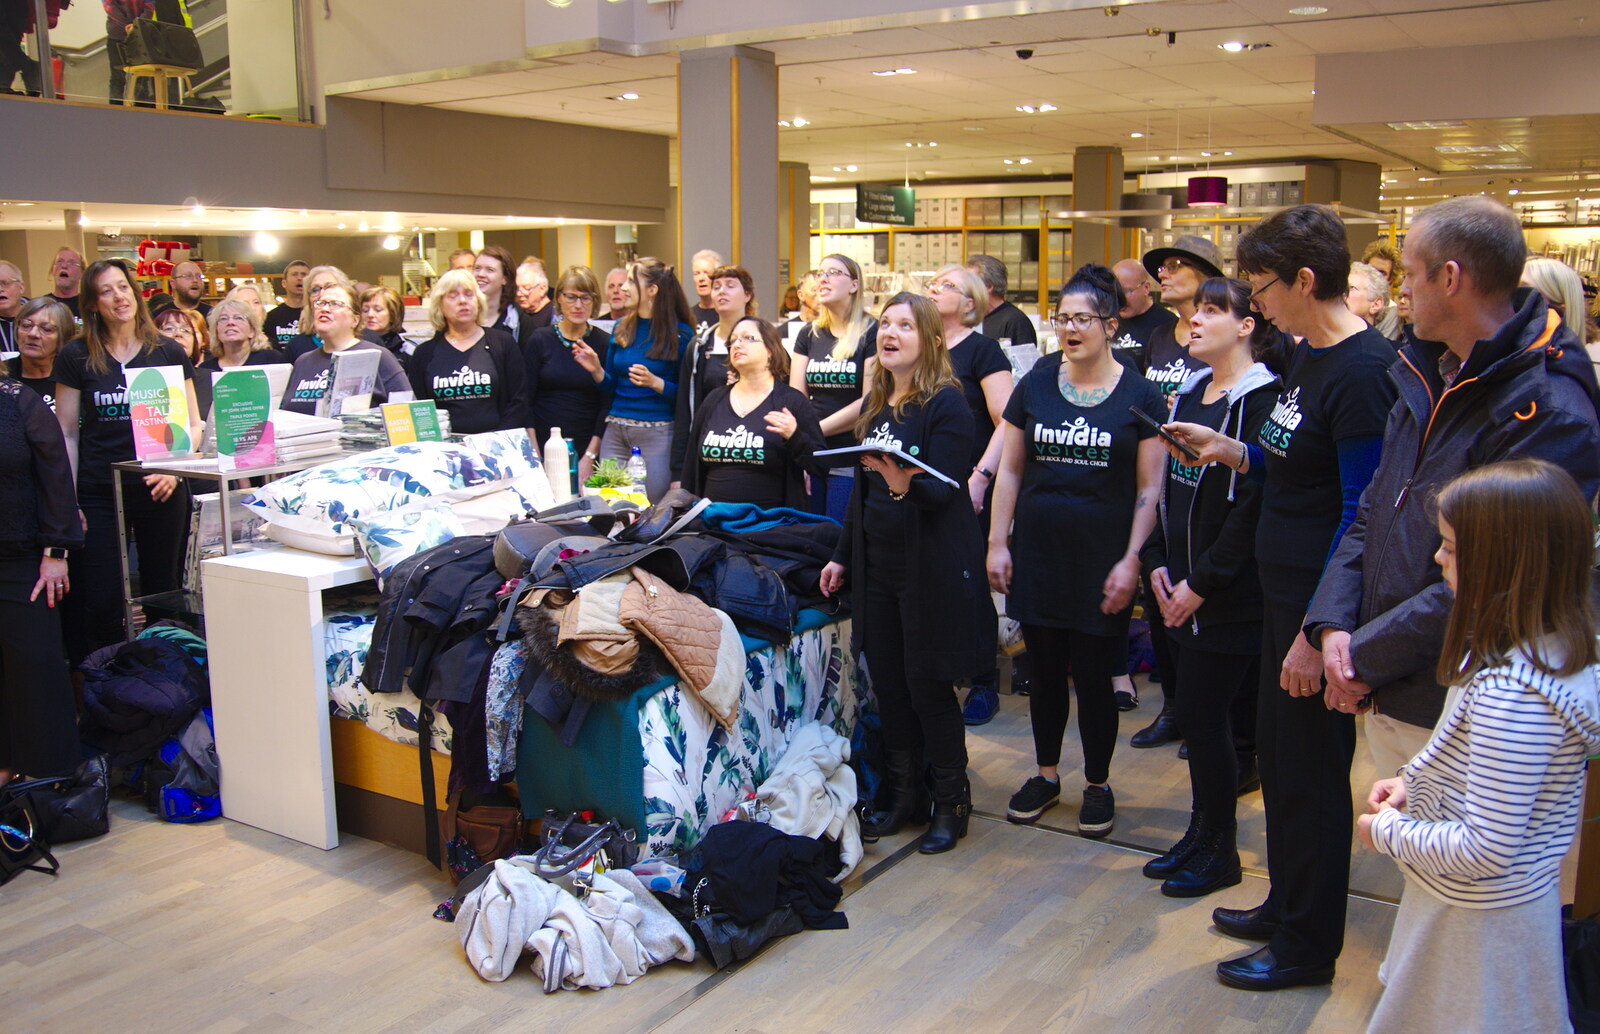 When we return, the choir is in its second session from Singing in John Lewis, Norwich, Norfolk - 13th April 2019